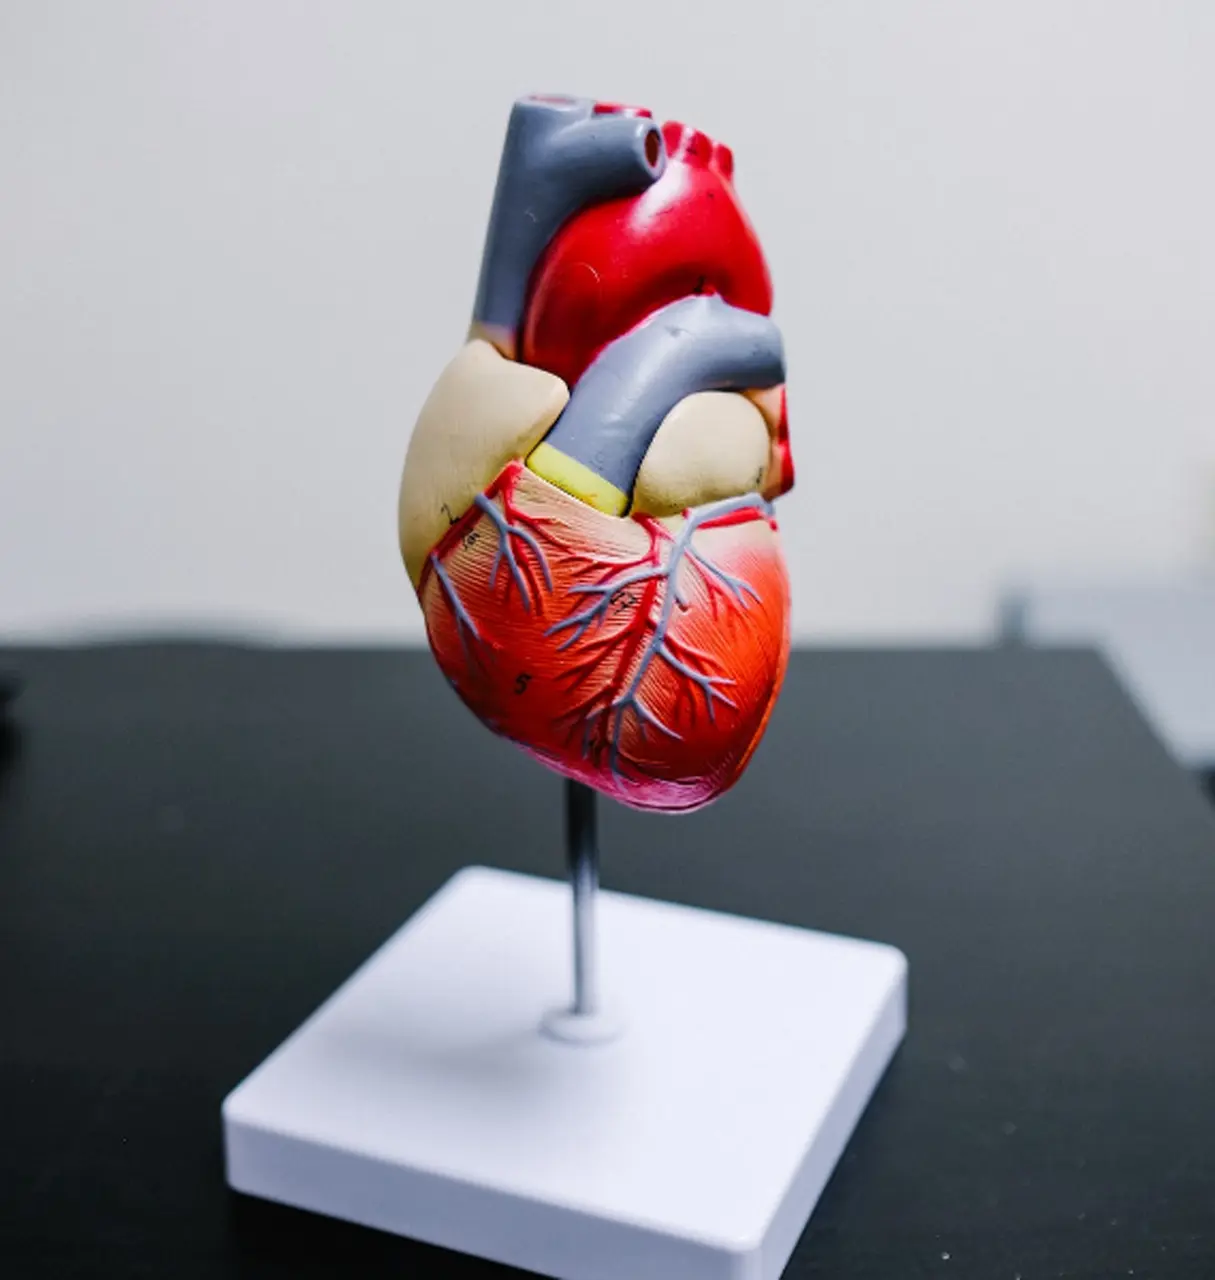 A plastic model of a human heart on a display stand.